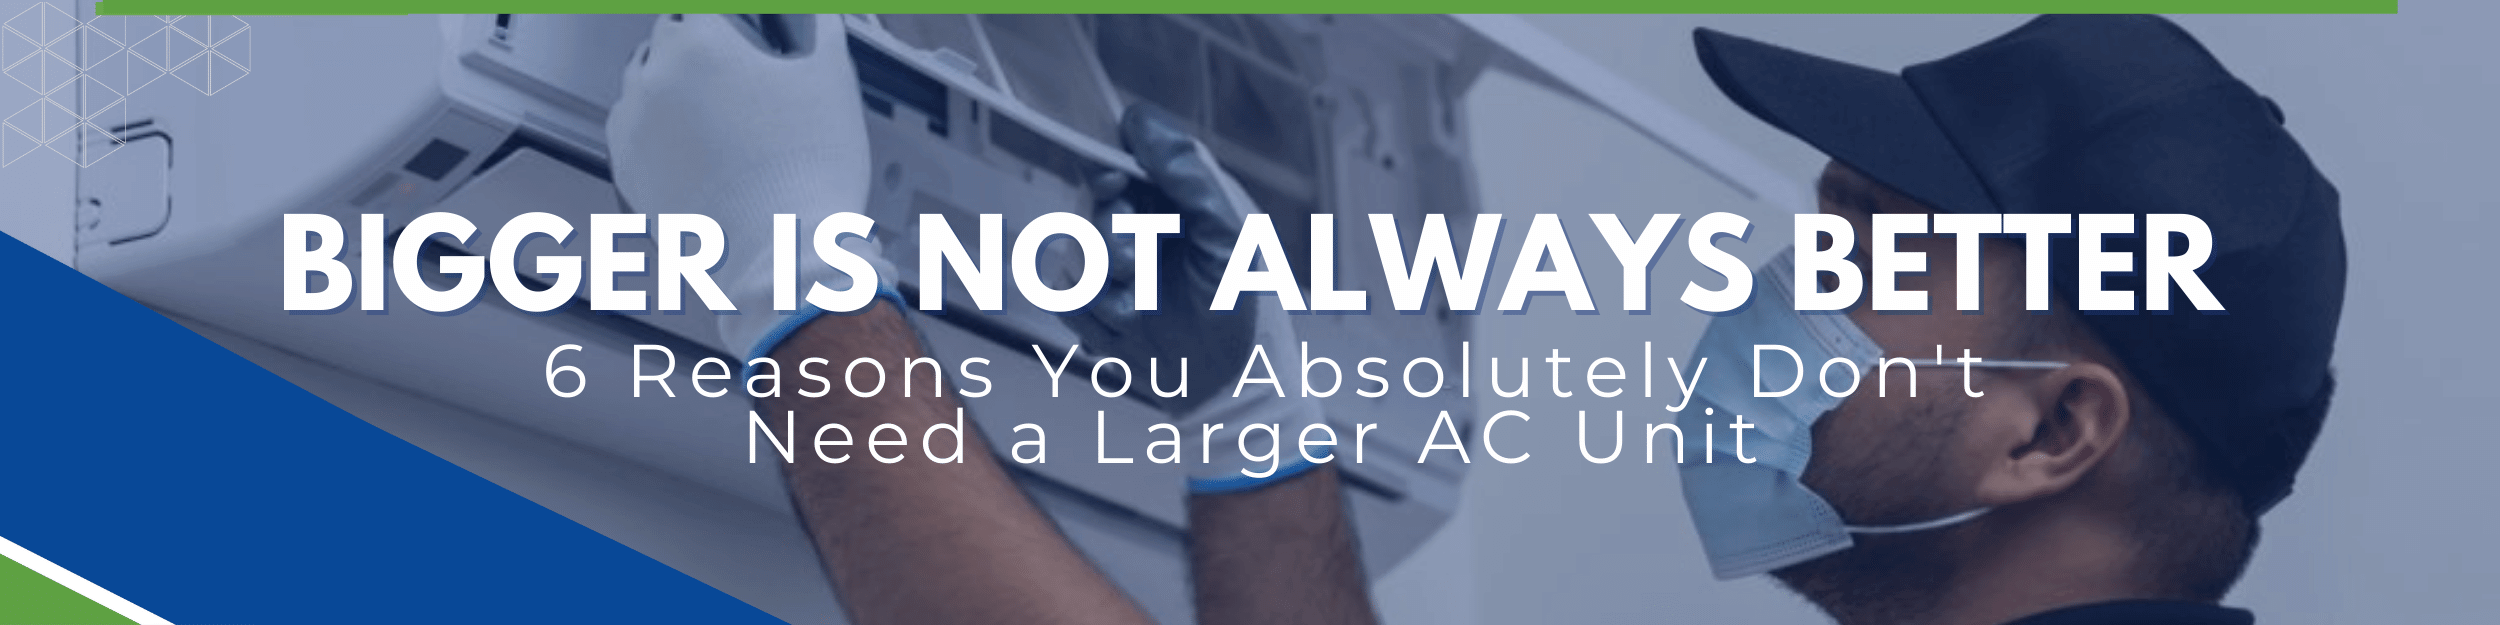 Bigger is not always Better with AC Units